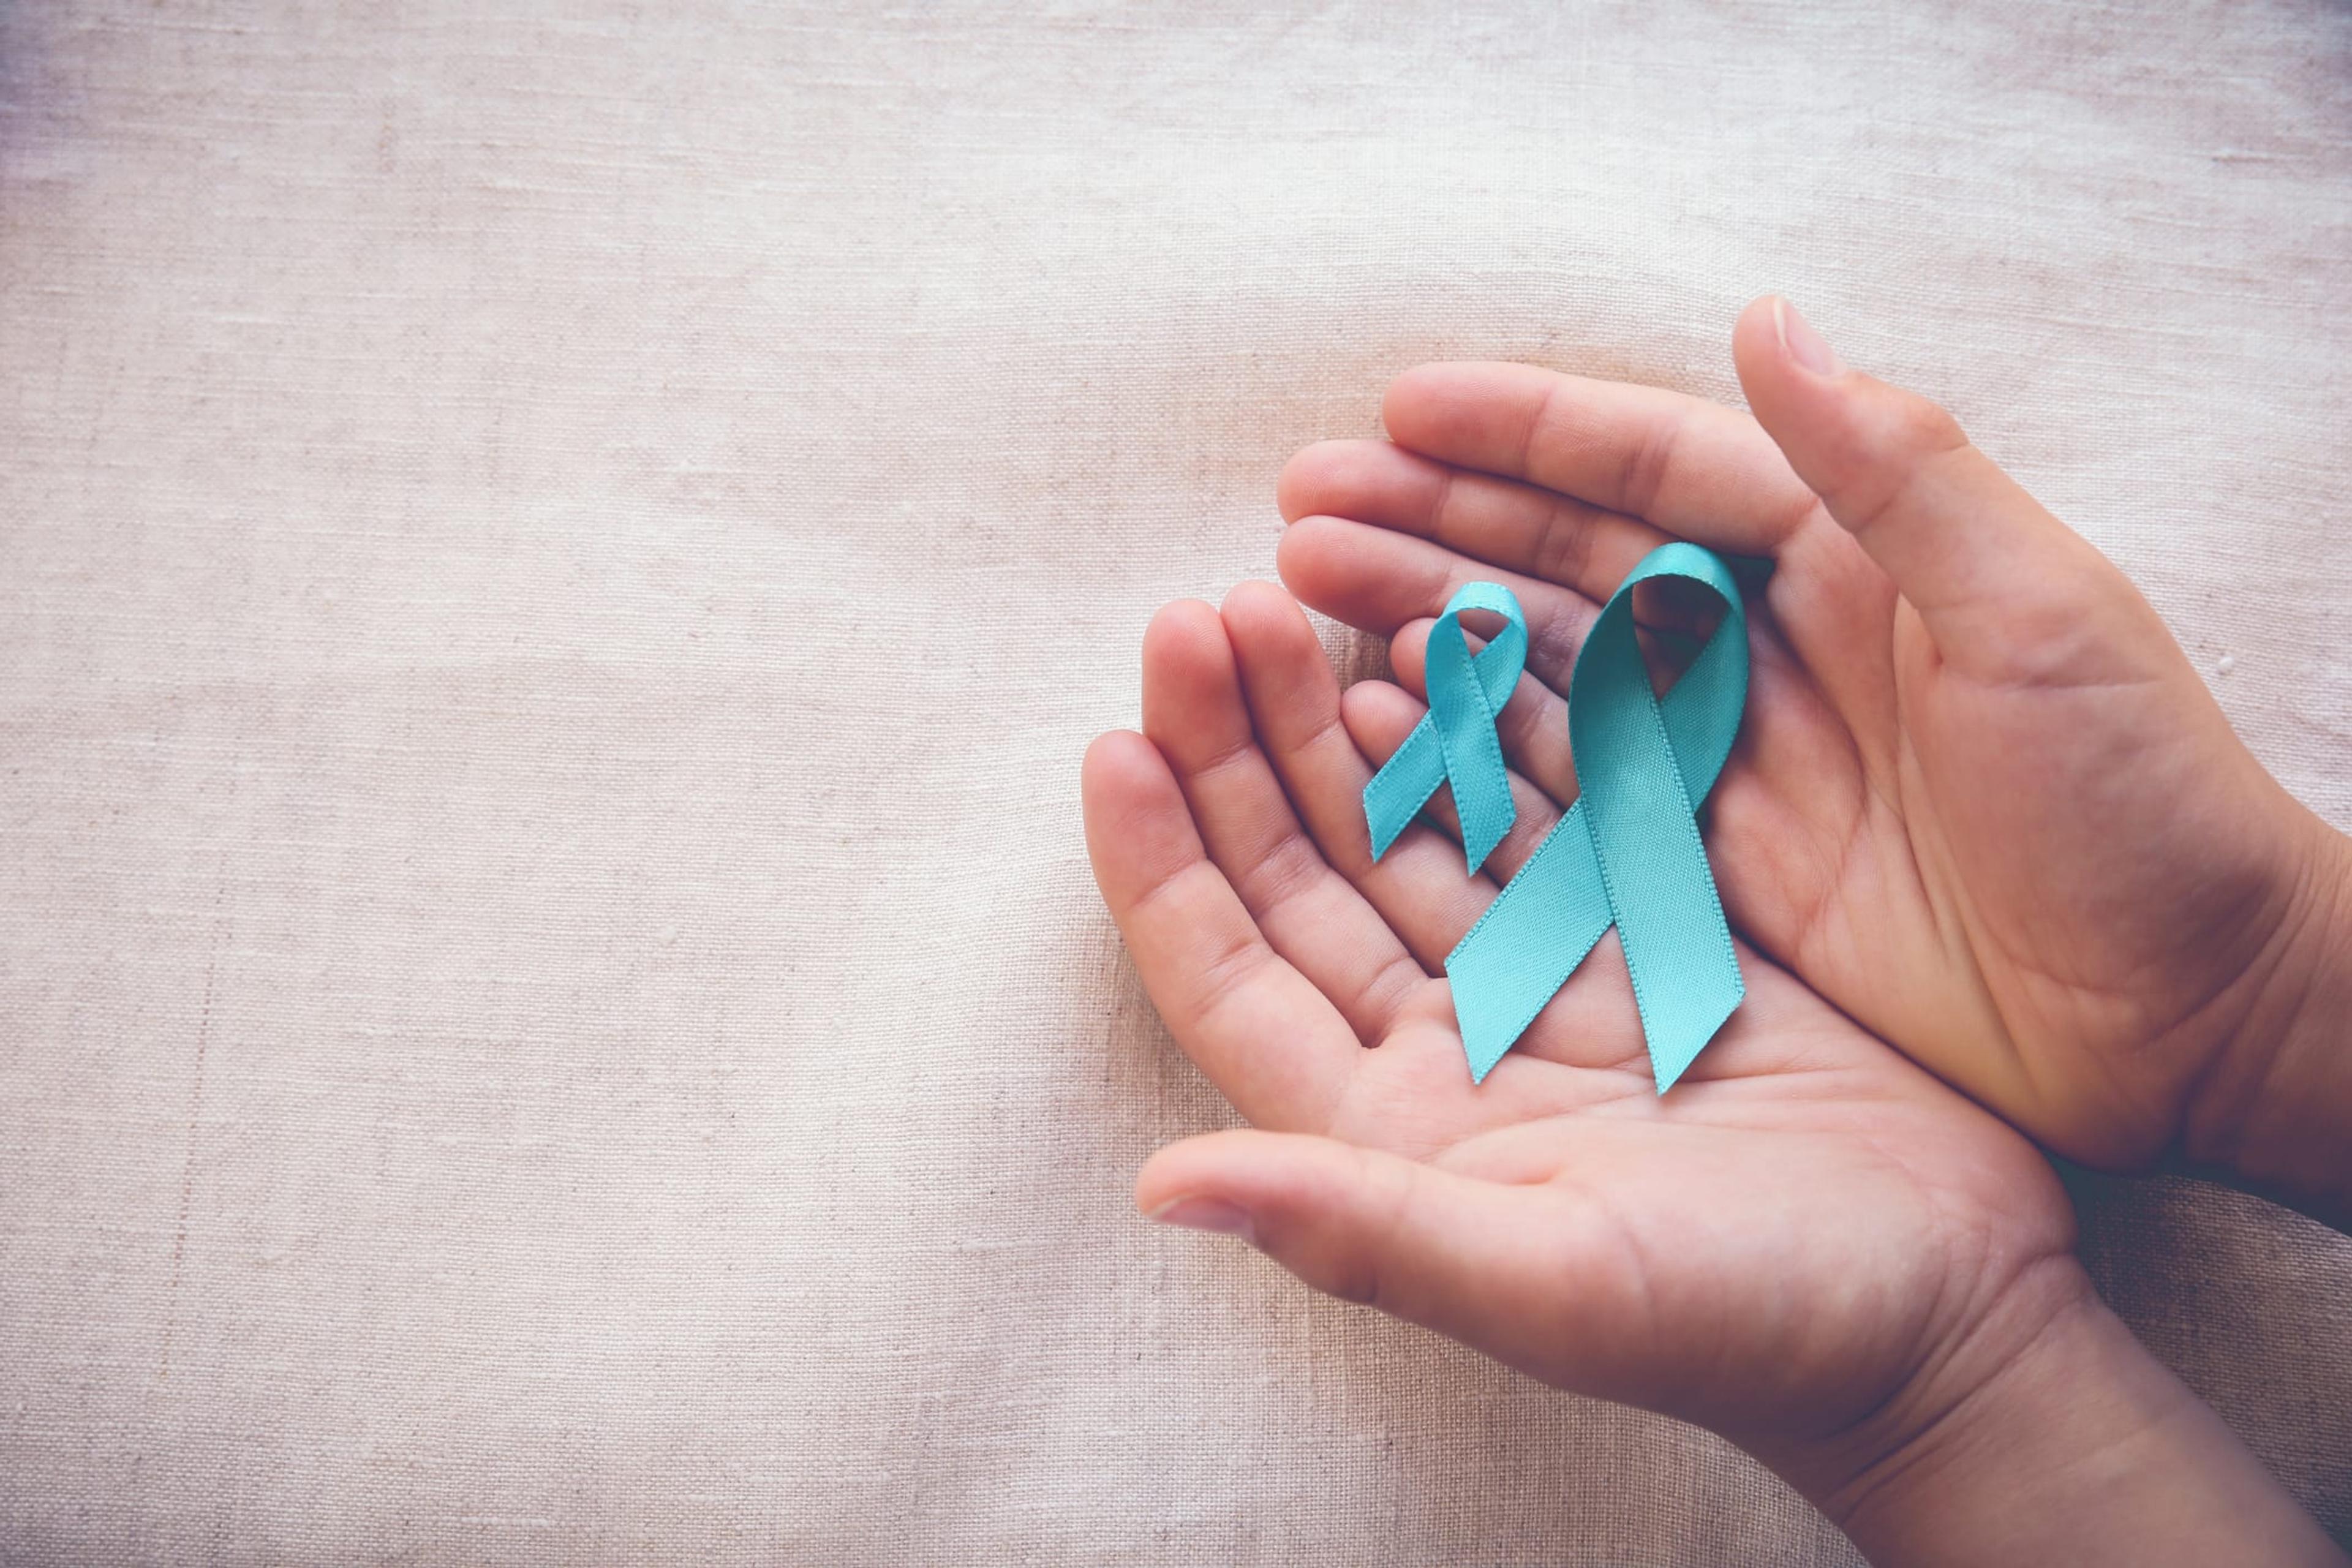 Hands holding teal ovarian cancer awareness ribbons